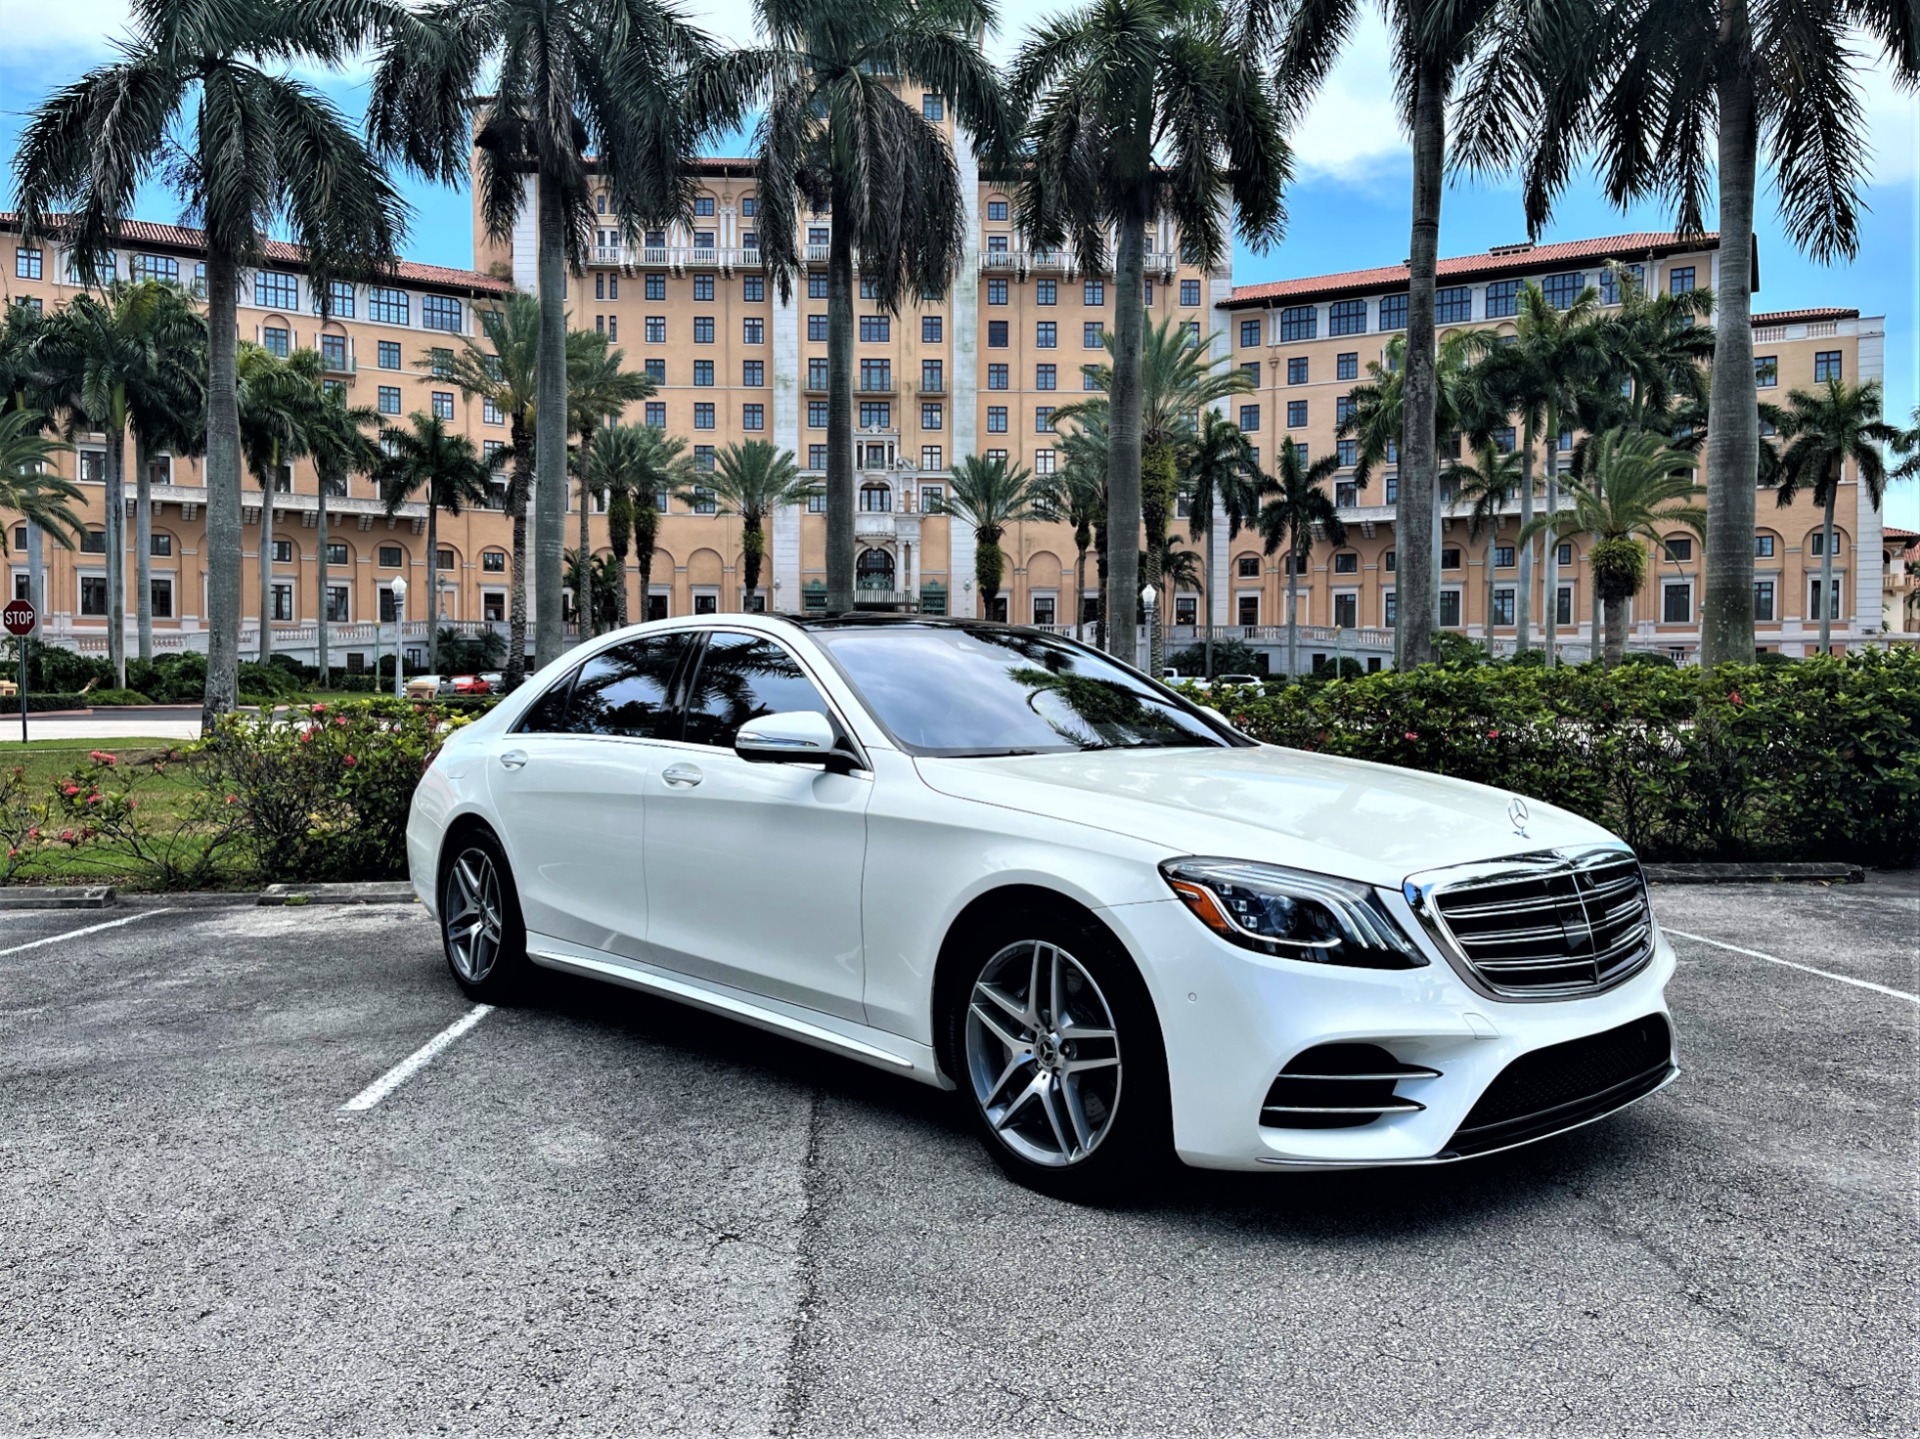 Used 2019 Mercedes-Benz S-Class S 560 4MATIC for sale Sold at The Gables Sports Cars in Miami FL 33146 2